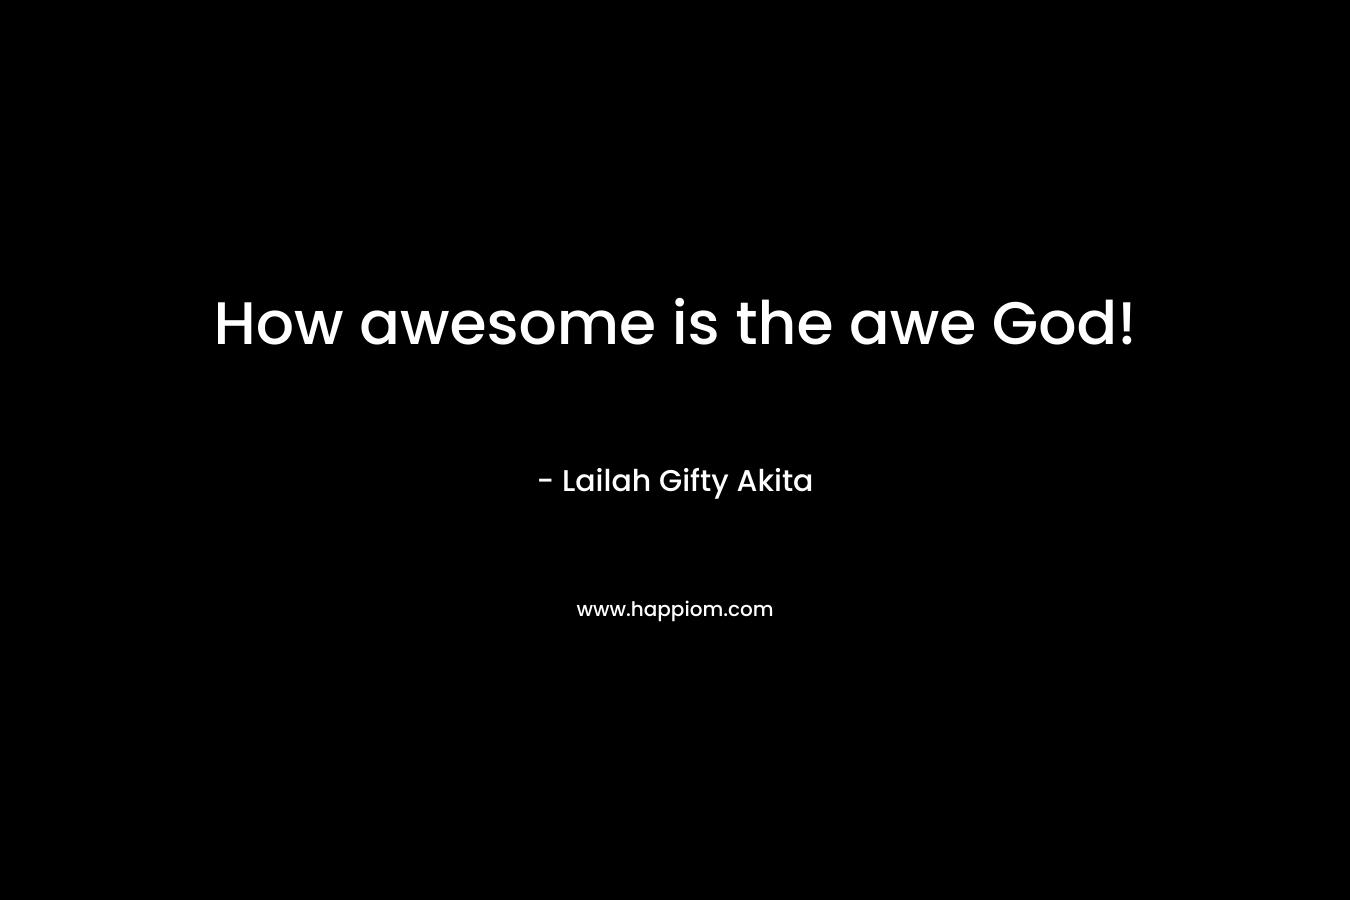 How awesome is the awe God!